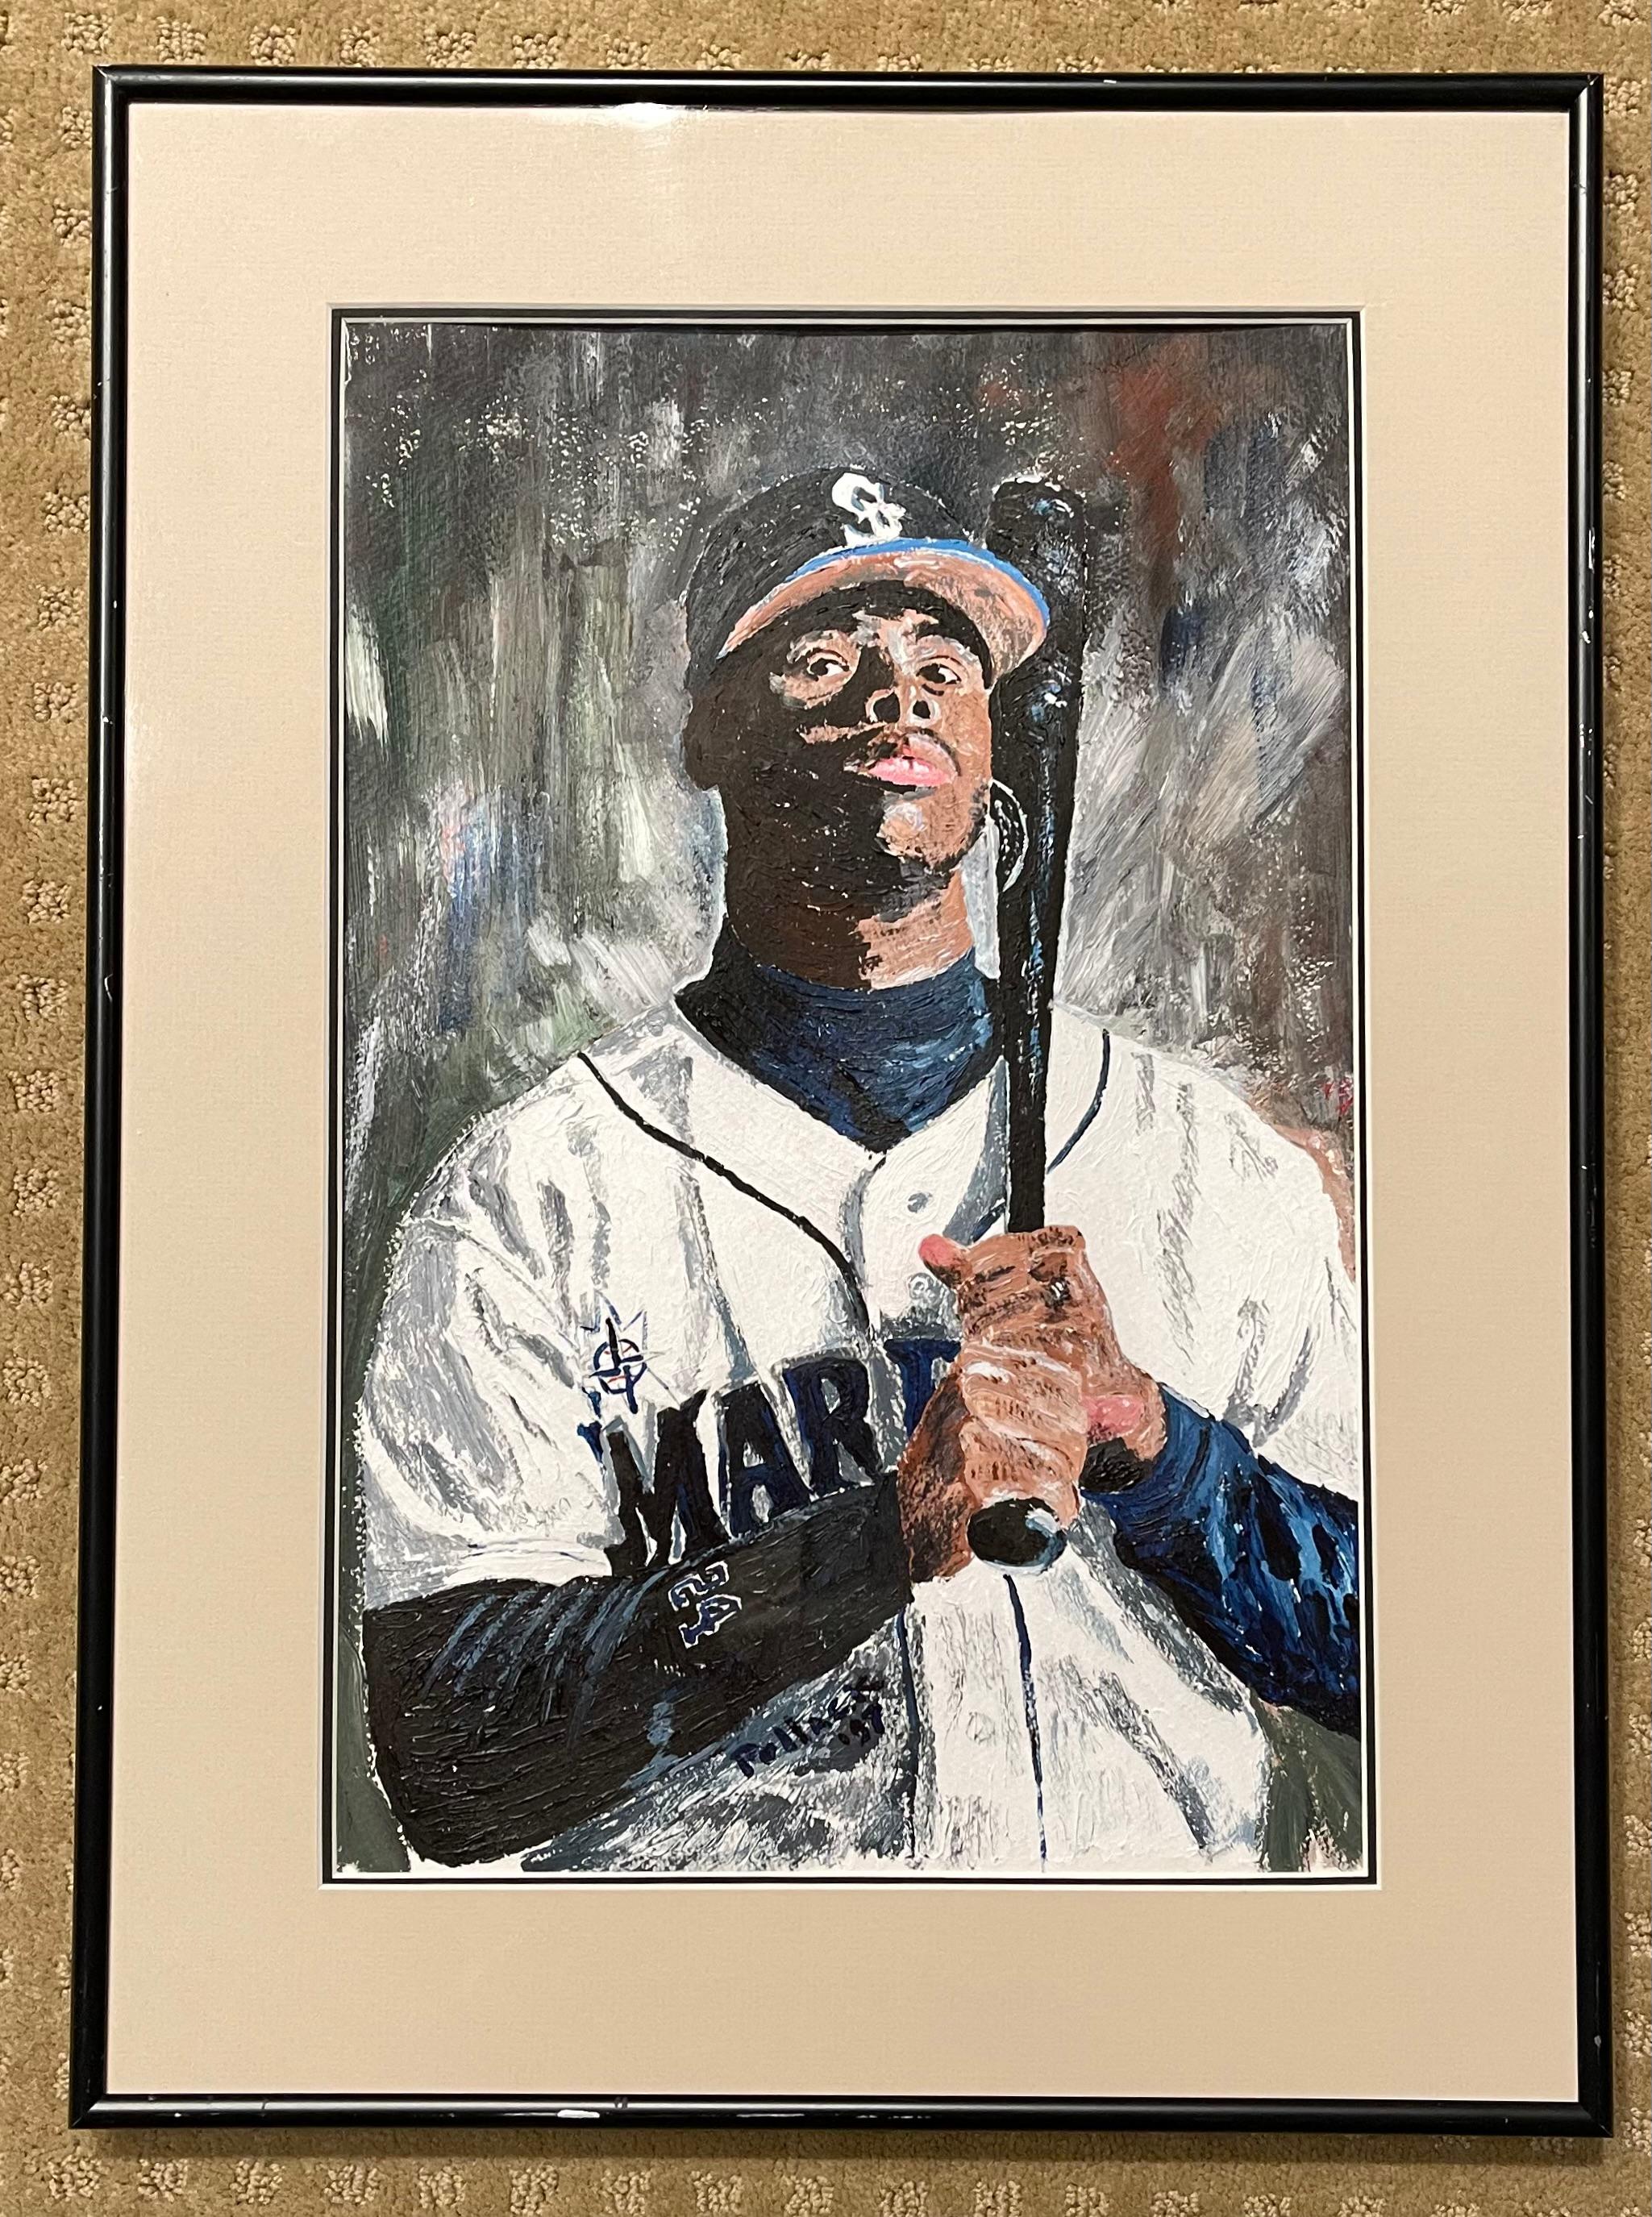 KEN GRIFFEY JR - Painting by Bob Pollack